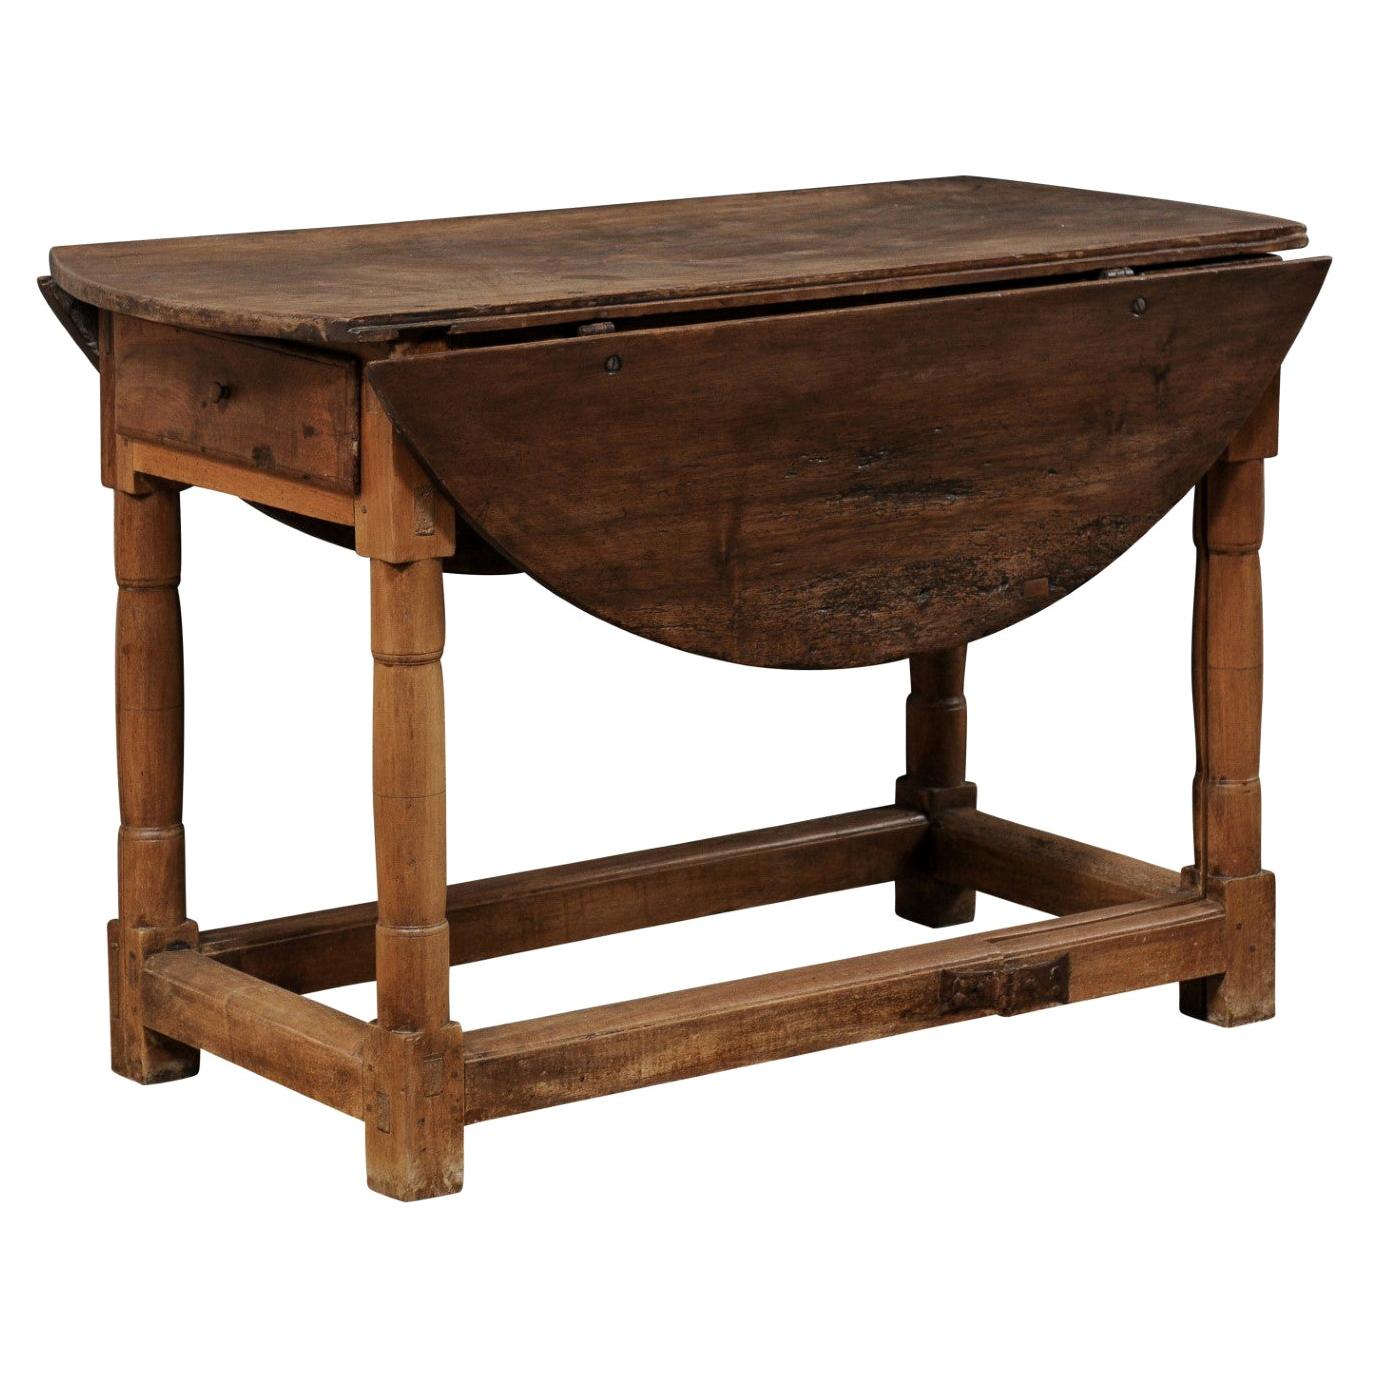 Italian Double Gate-Leg Table w/Drop Leaves on Either Side, Turn of 18th/19th C.